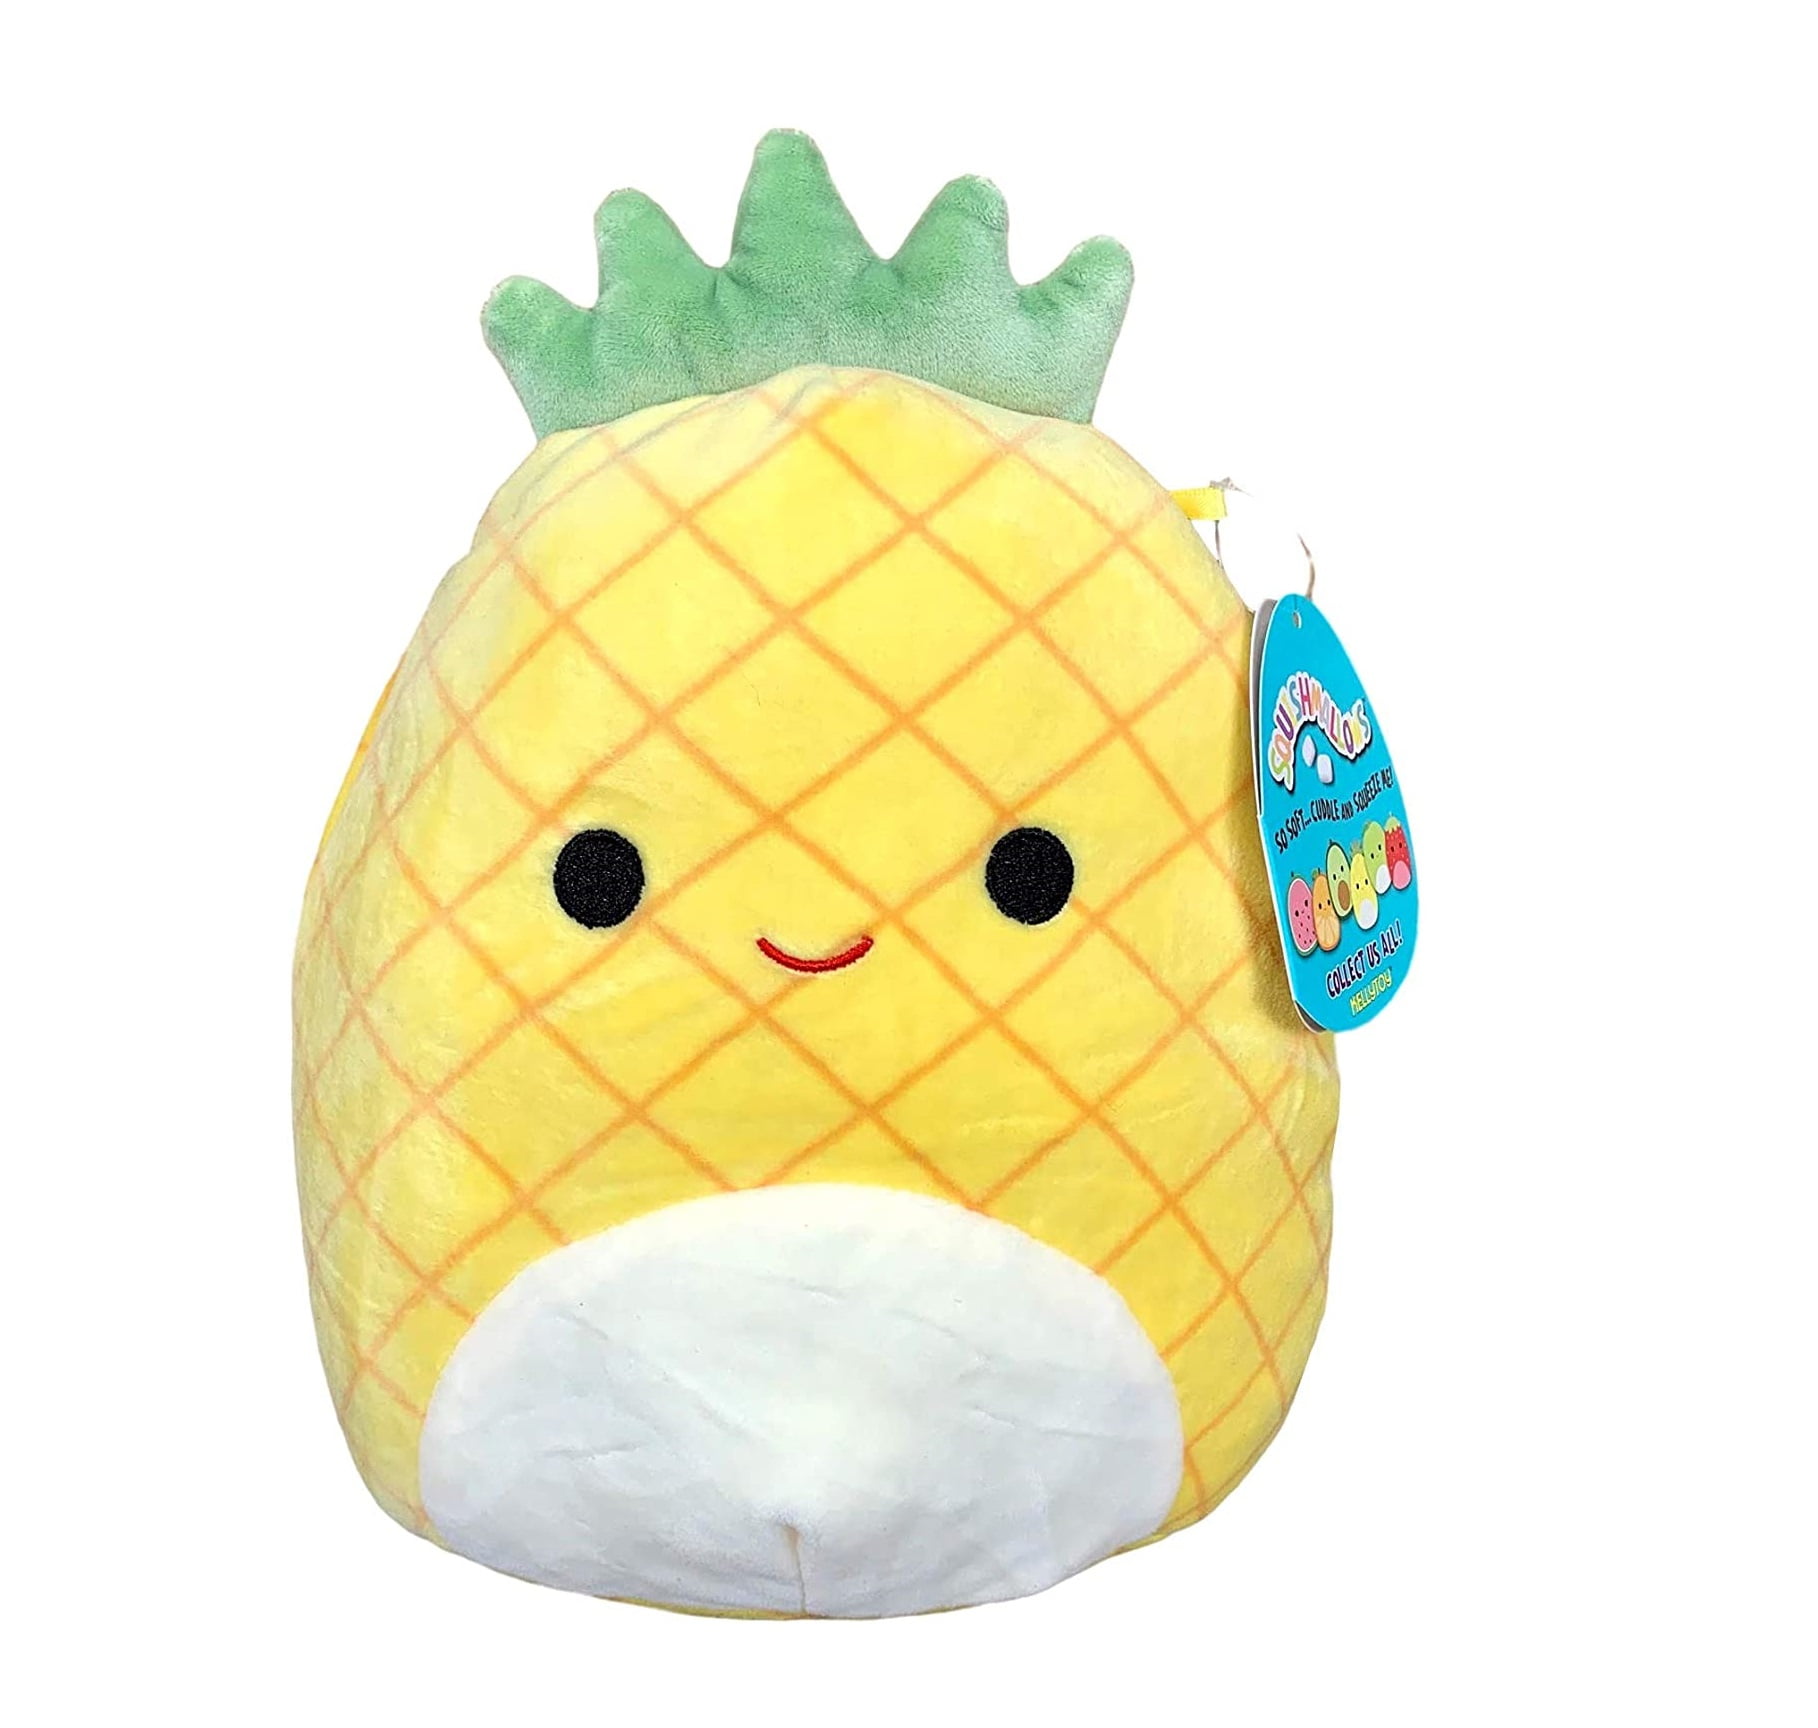 Large 12" Squishmallows Fruit Maui Pineapple Plush Doll Cute Bed Back Pillow Toy 